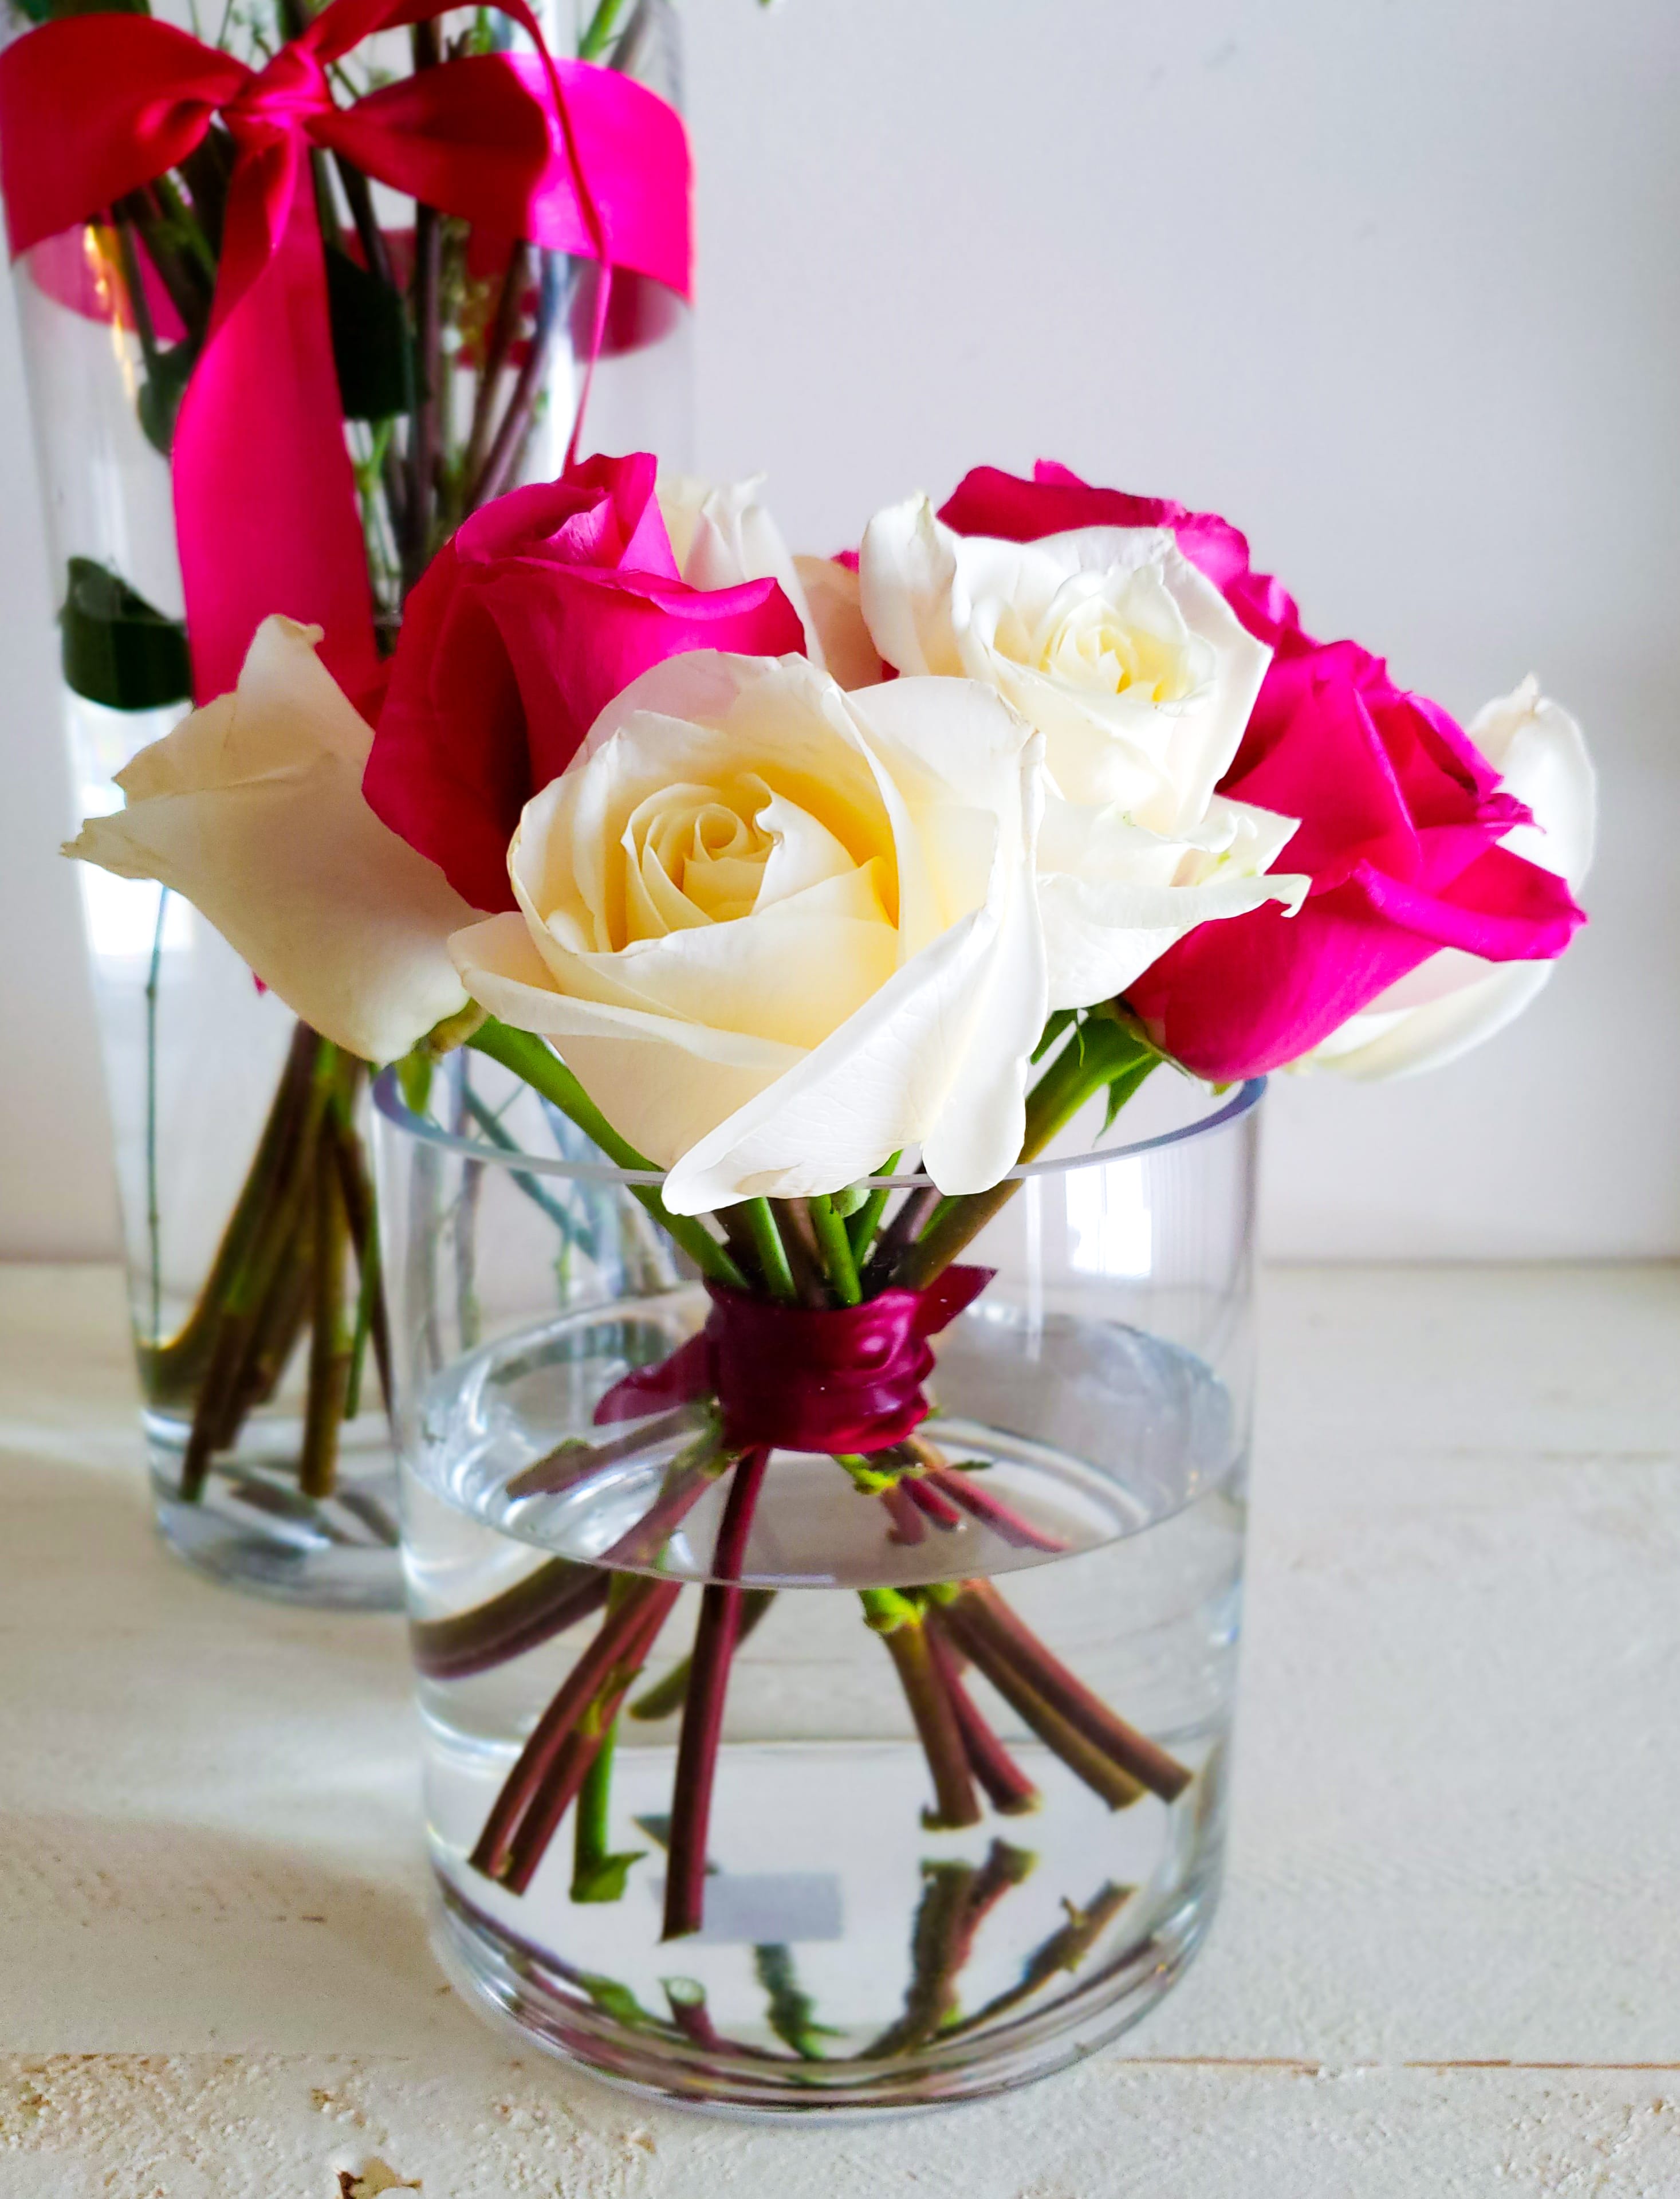 short cut roses that are white and pink